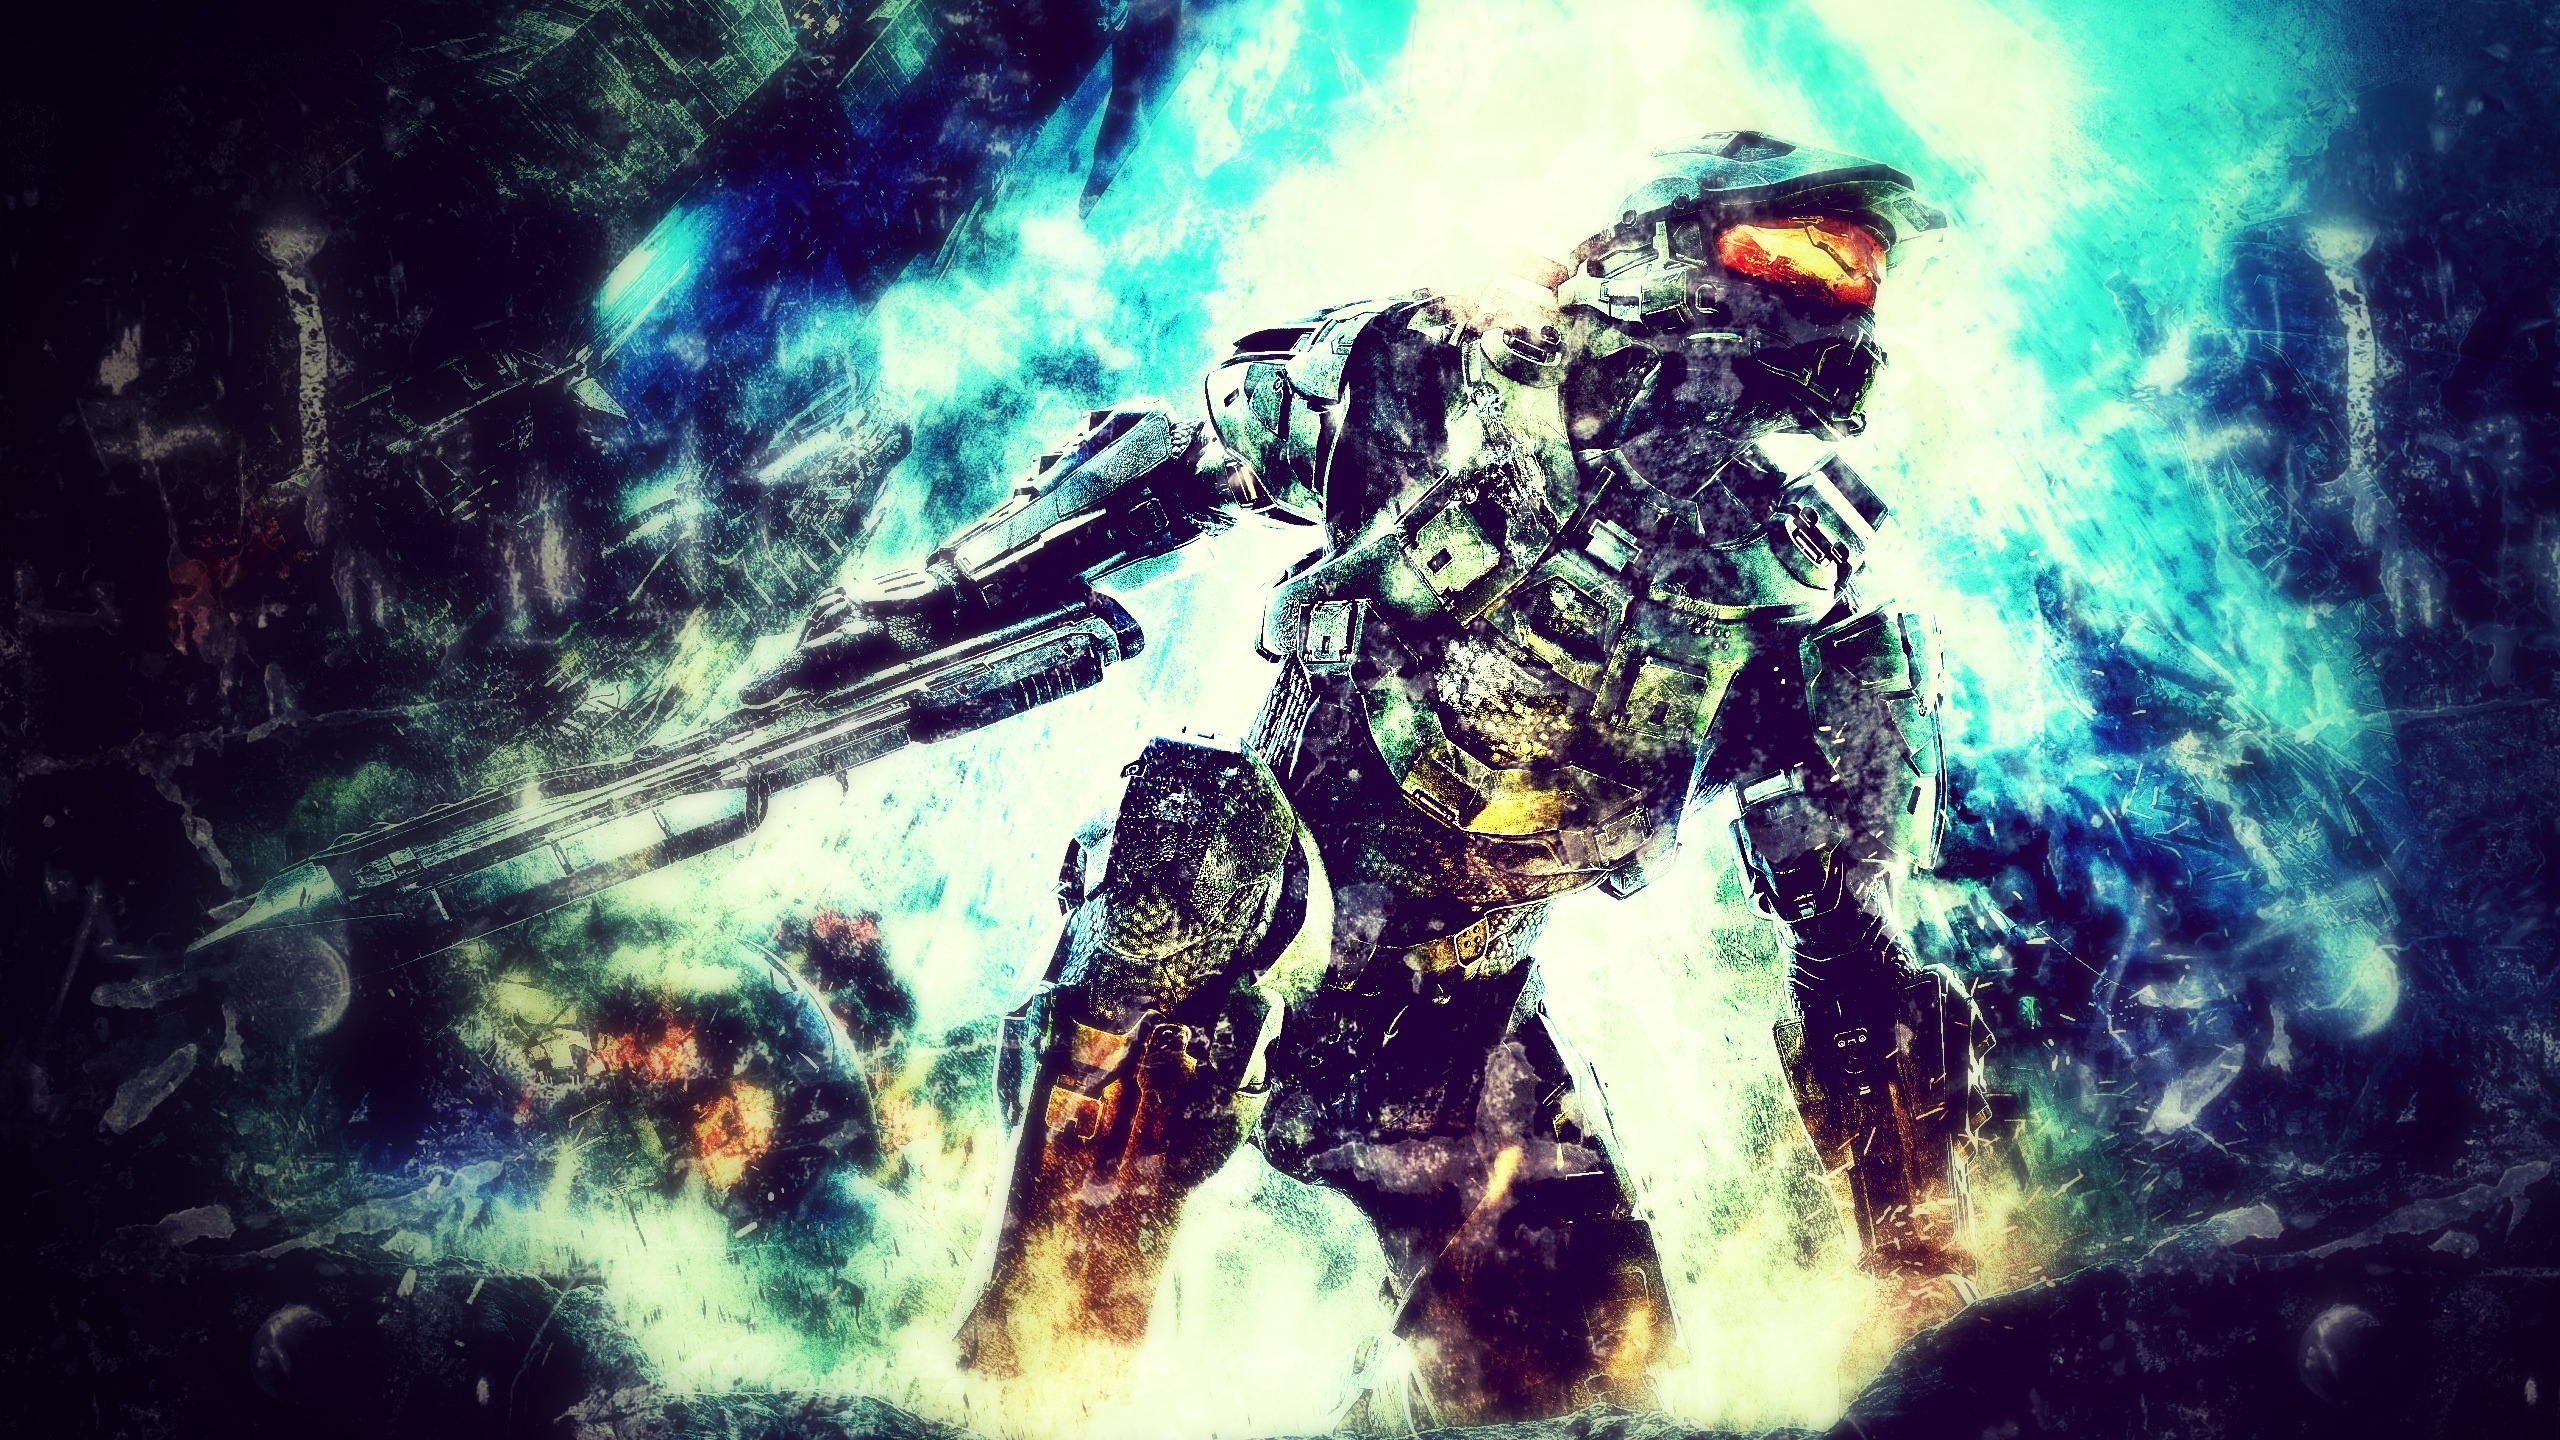 Halo 4 for 2560x1440 HDTV resolution